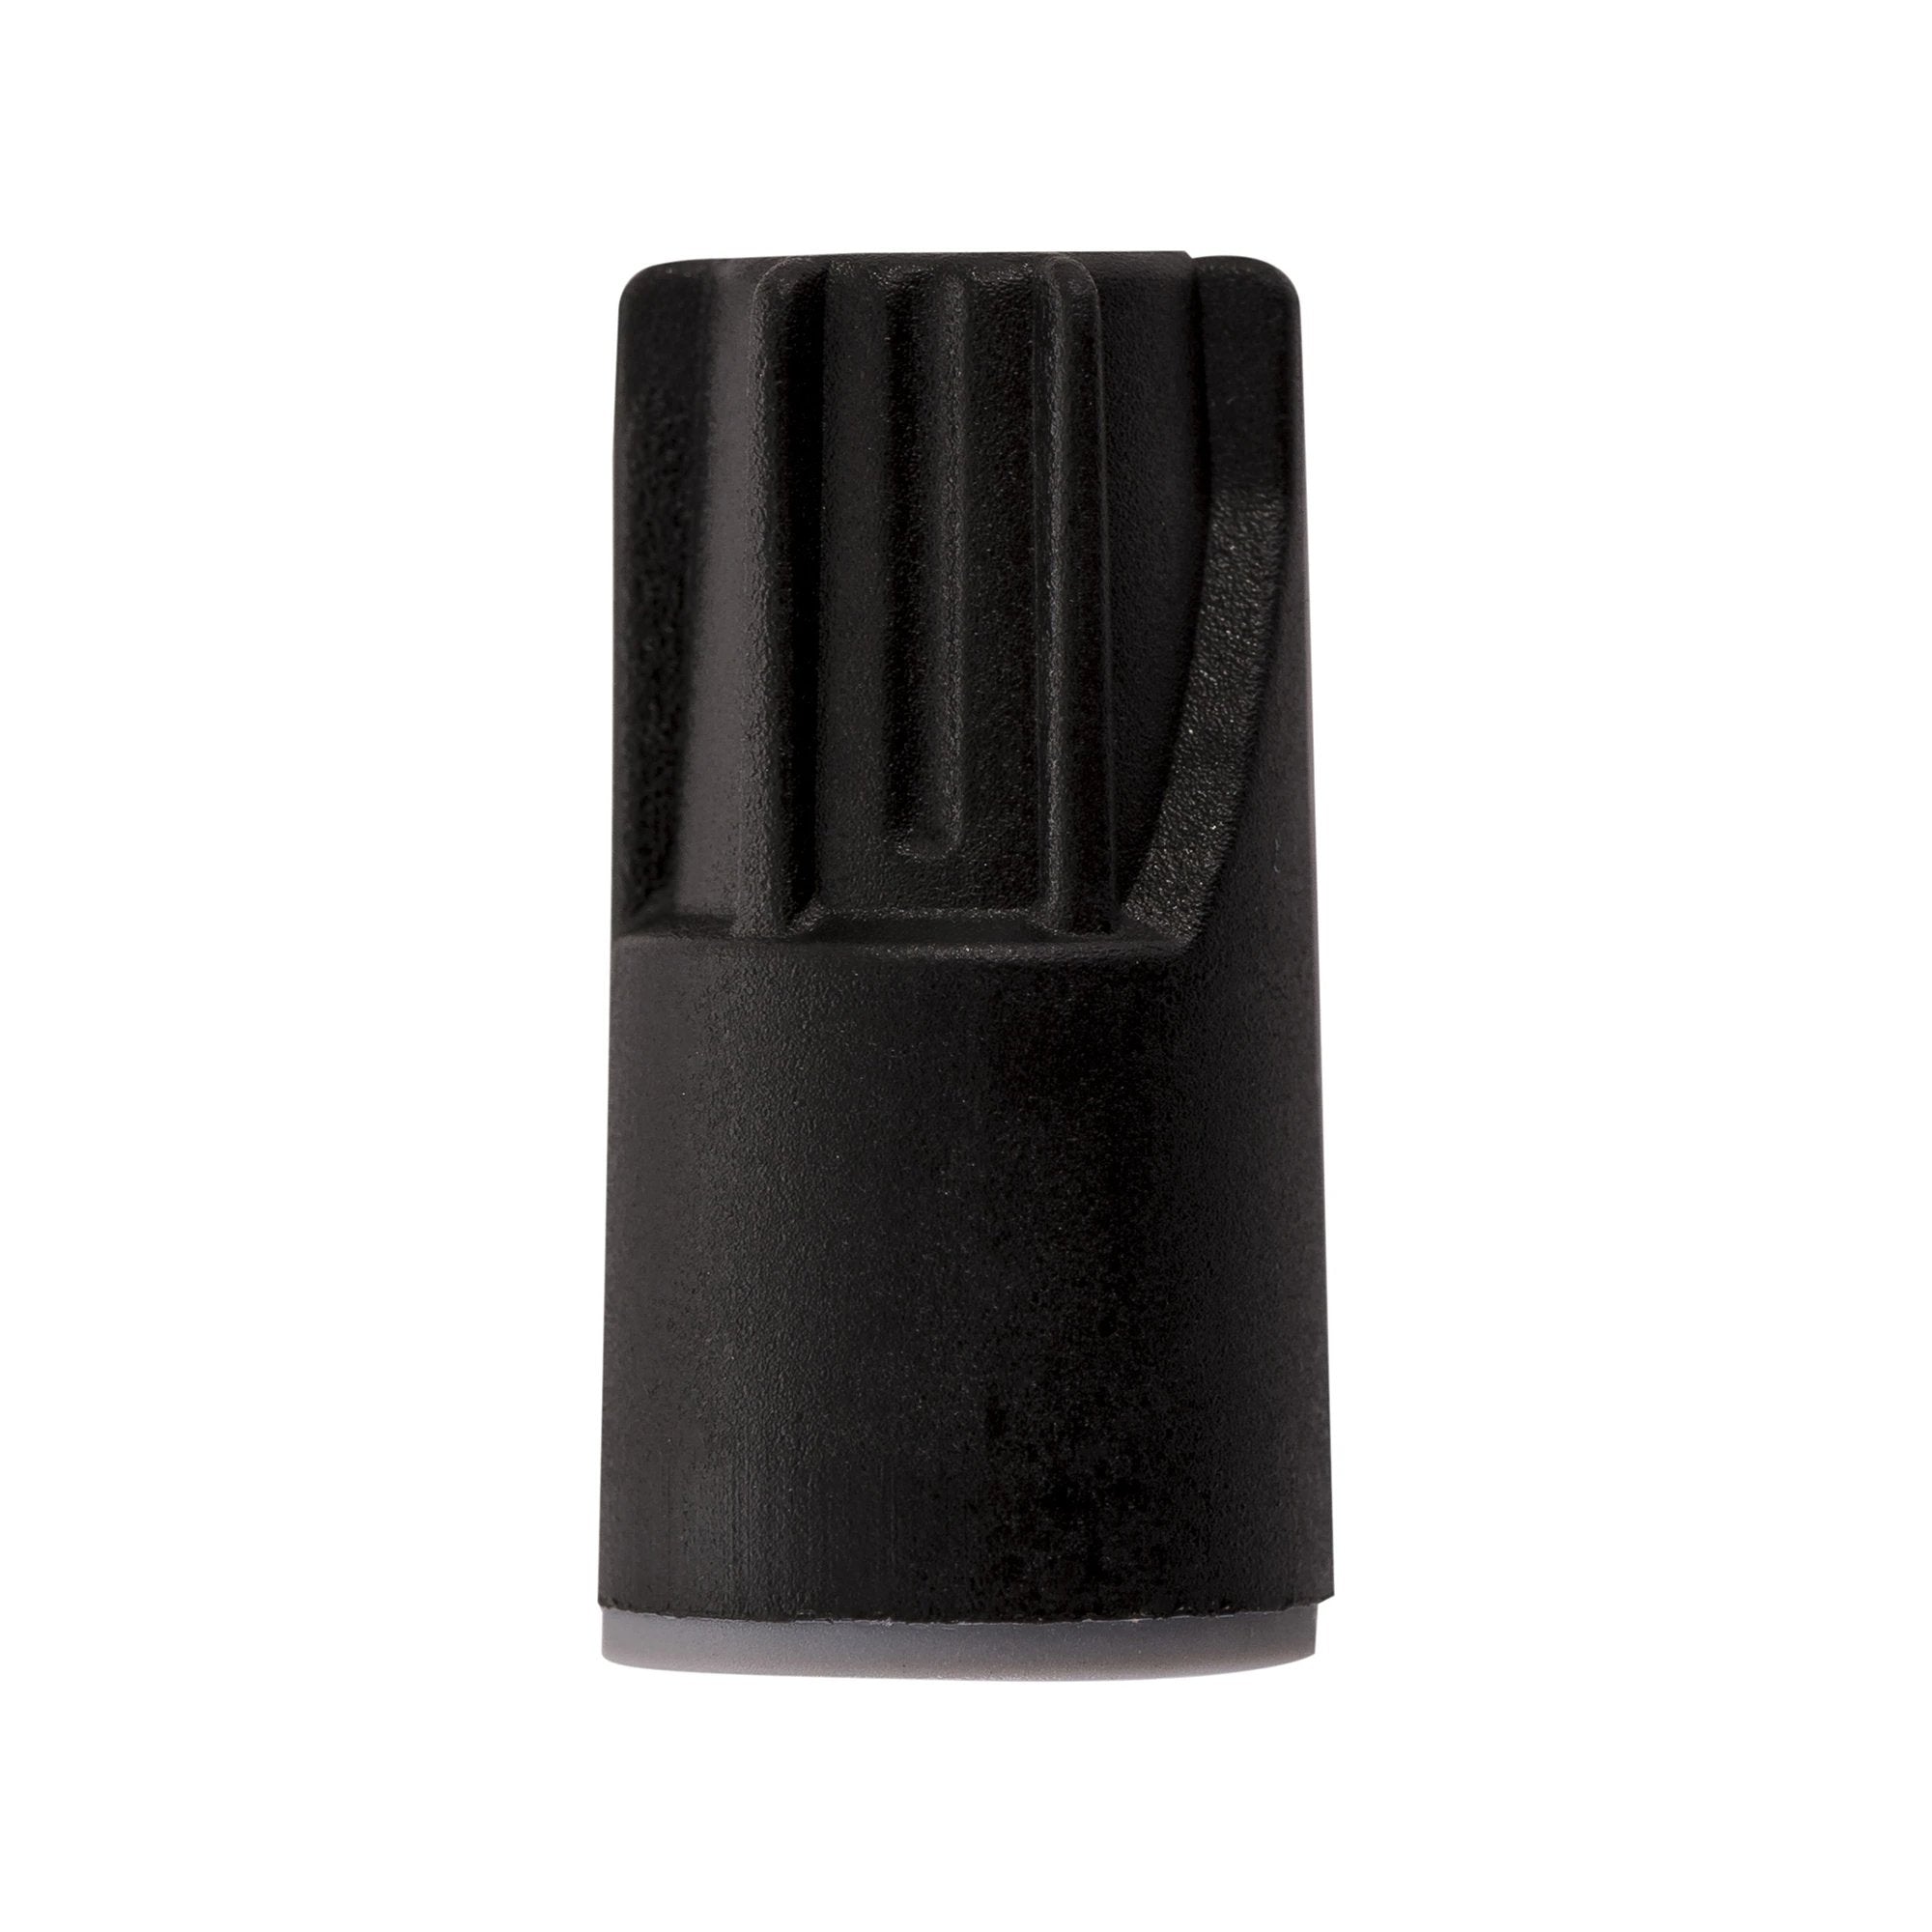 HV9911 - Small IP67 Weatherproof Connector